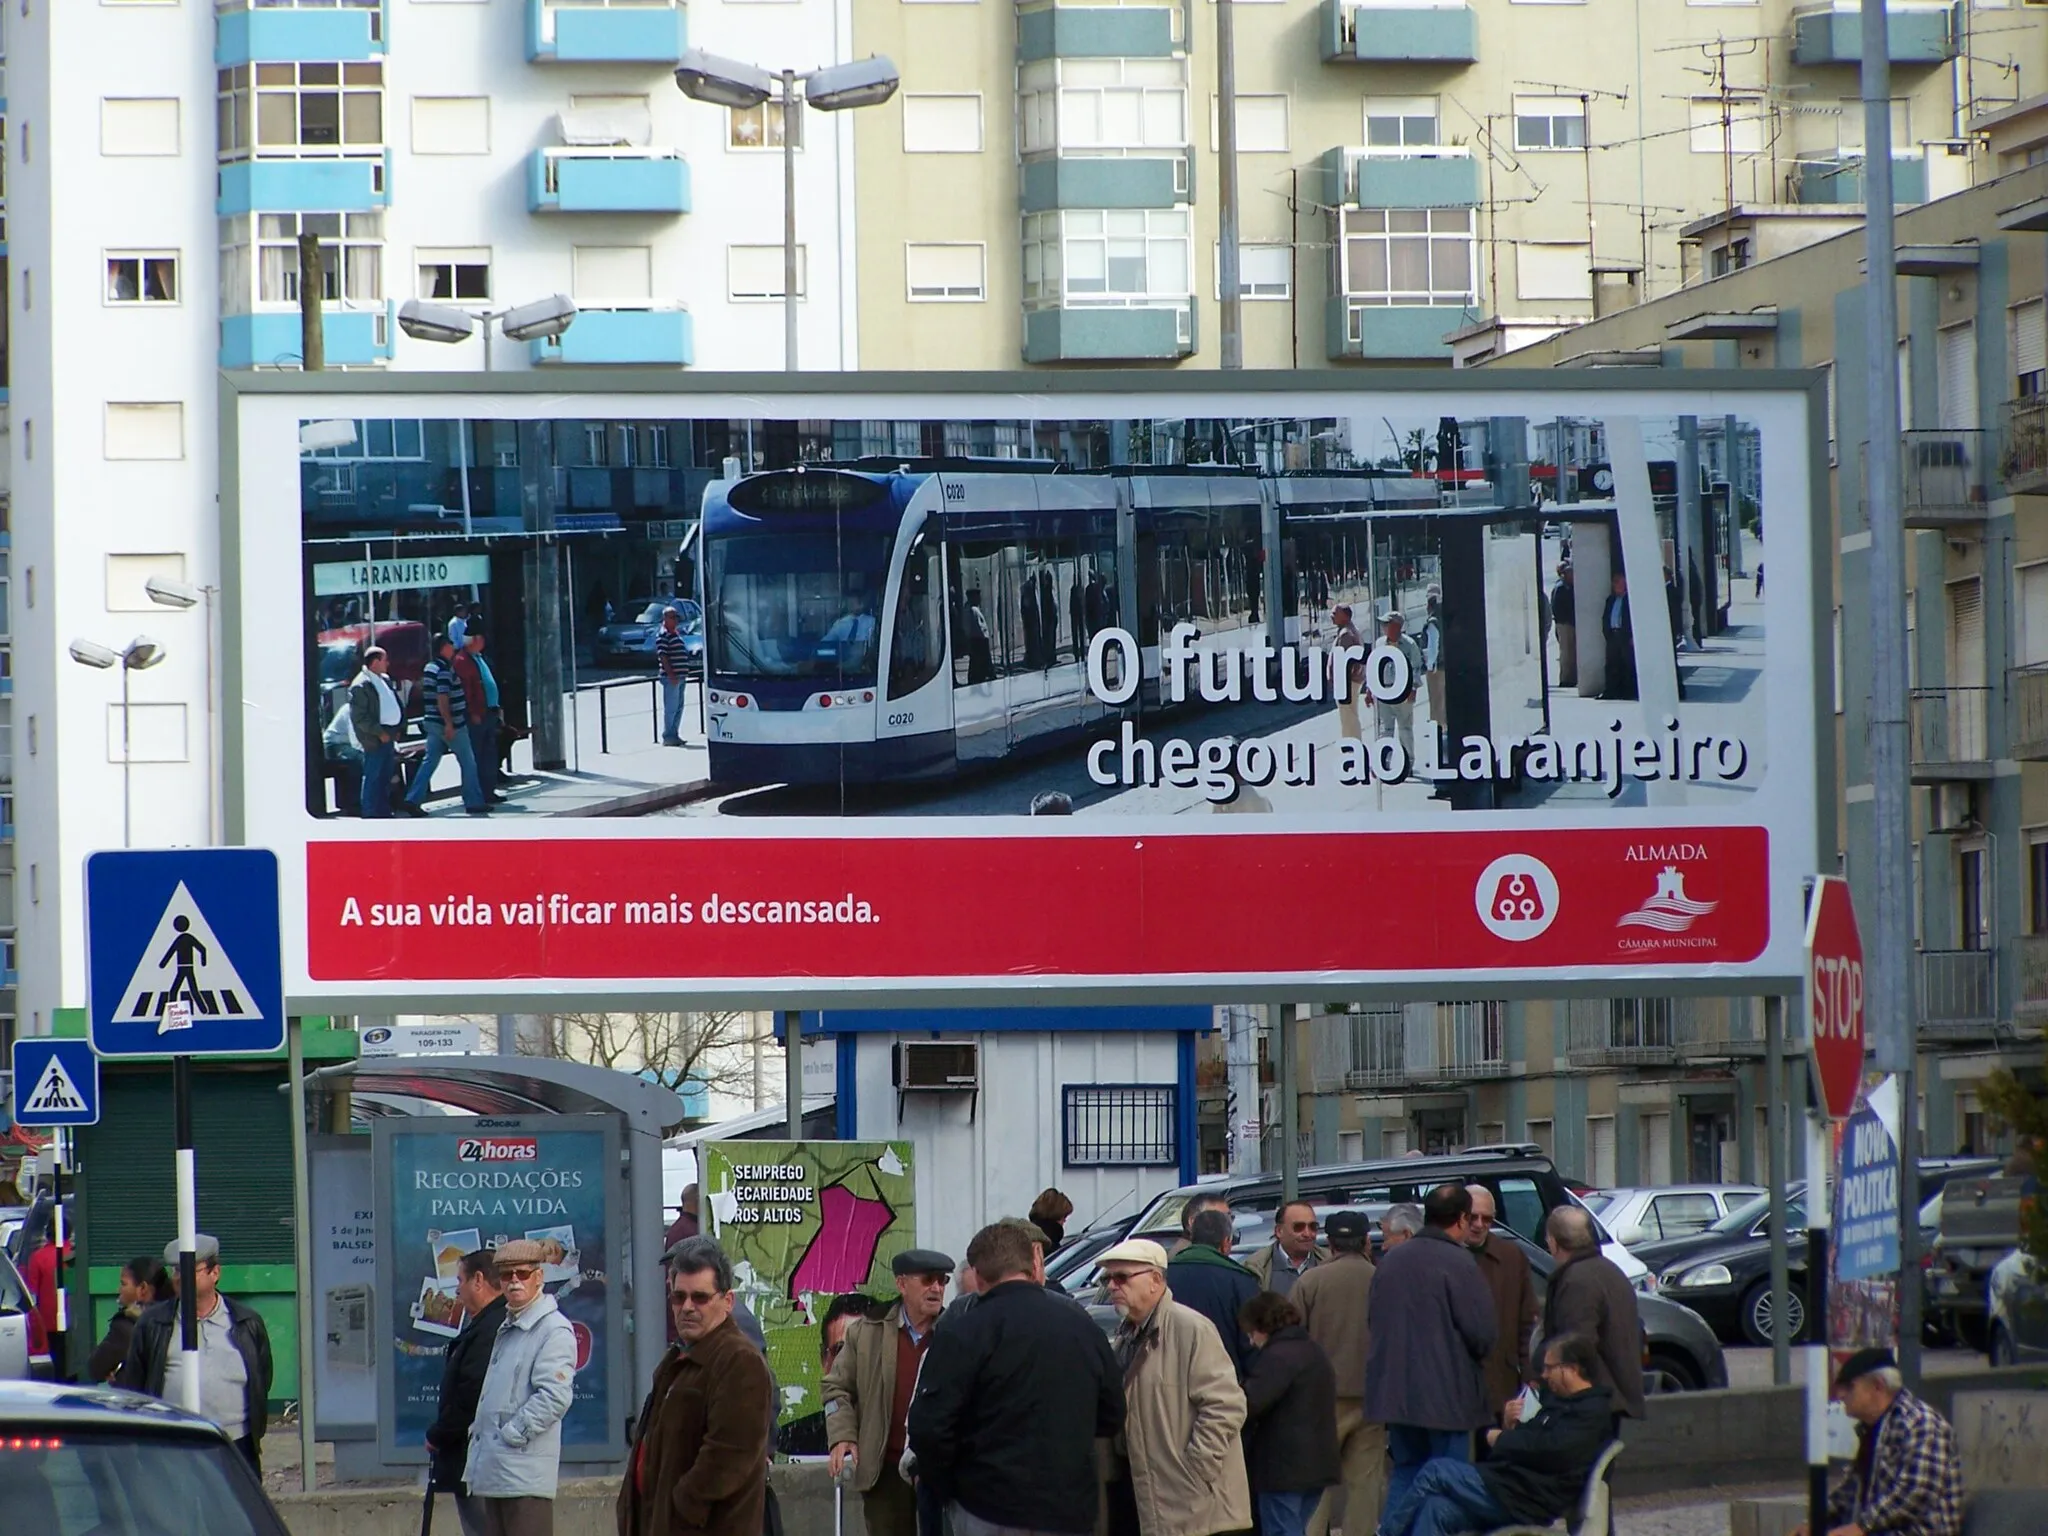 Photo showing: Advertisement for the new tramway system "Metro Sul do Tejo" in Laranjeiro, Almada, Portugal. Siemens Combino Plus tram (#C020), built 2007, on the advertisement.